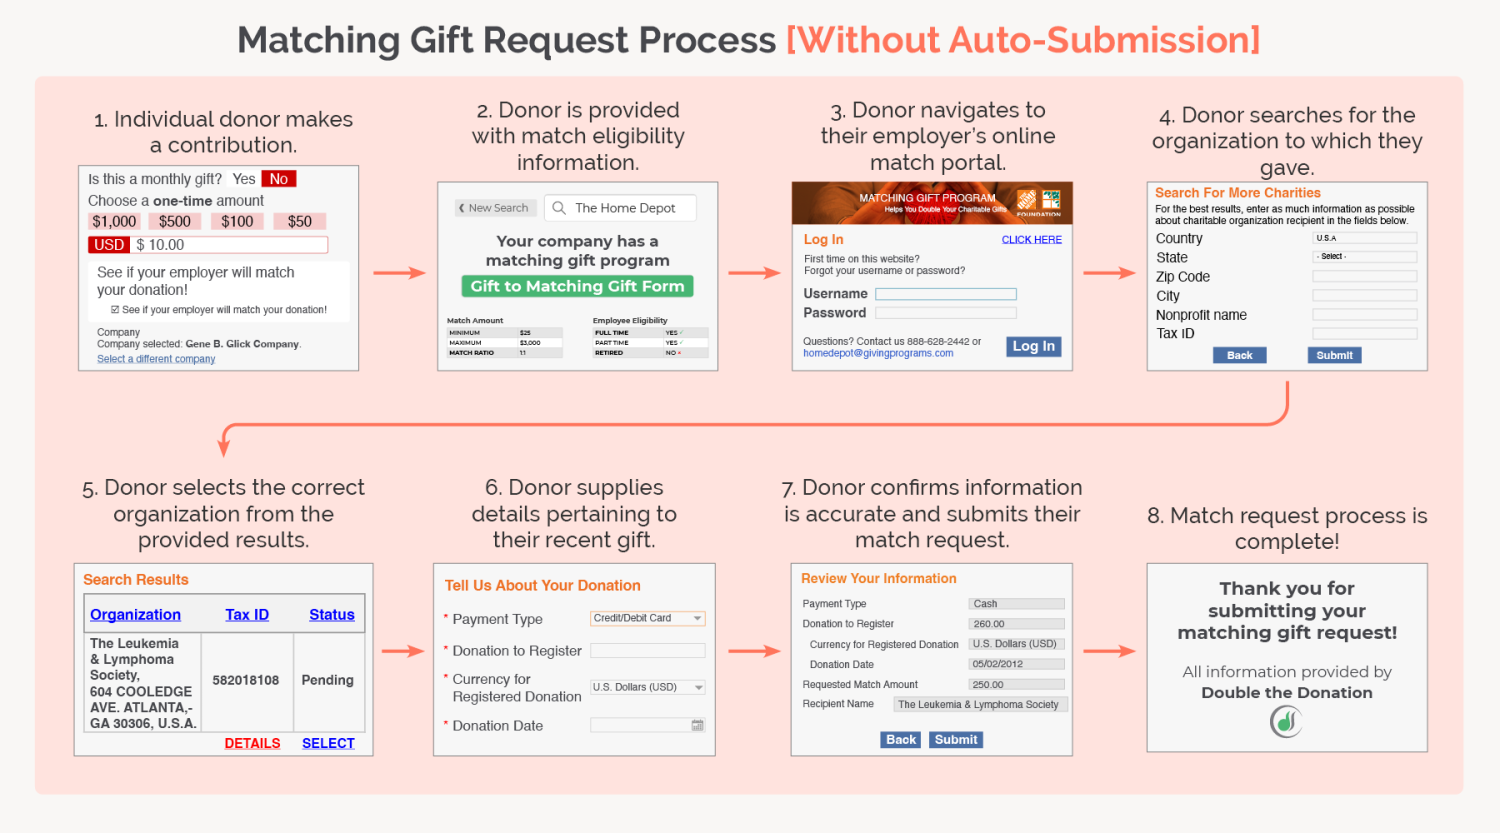  A graphic explaining the complex matching gift submission process without auto-submission, which includes 8 steps from the individual making the contribution to the completed match. 